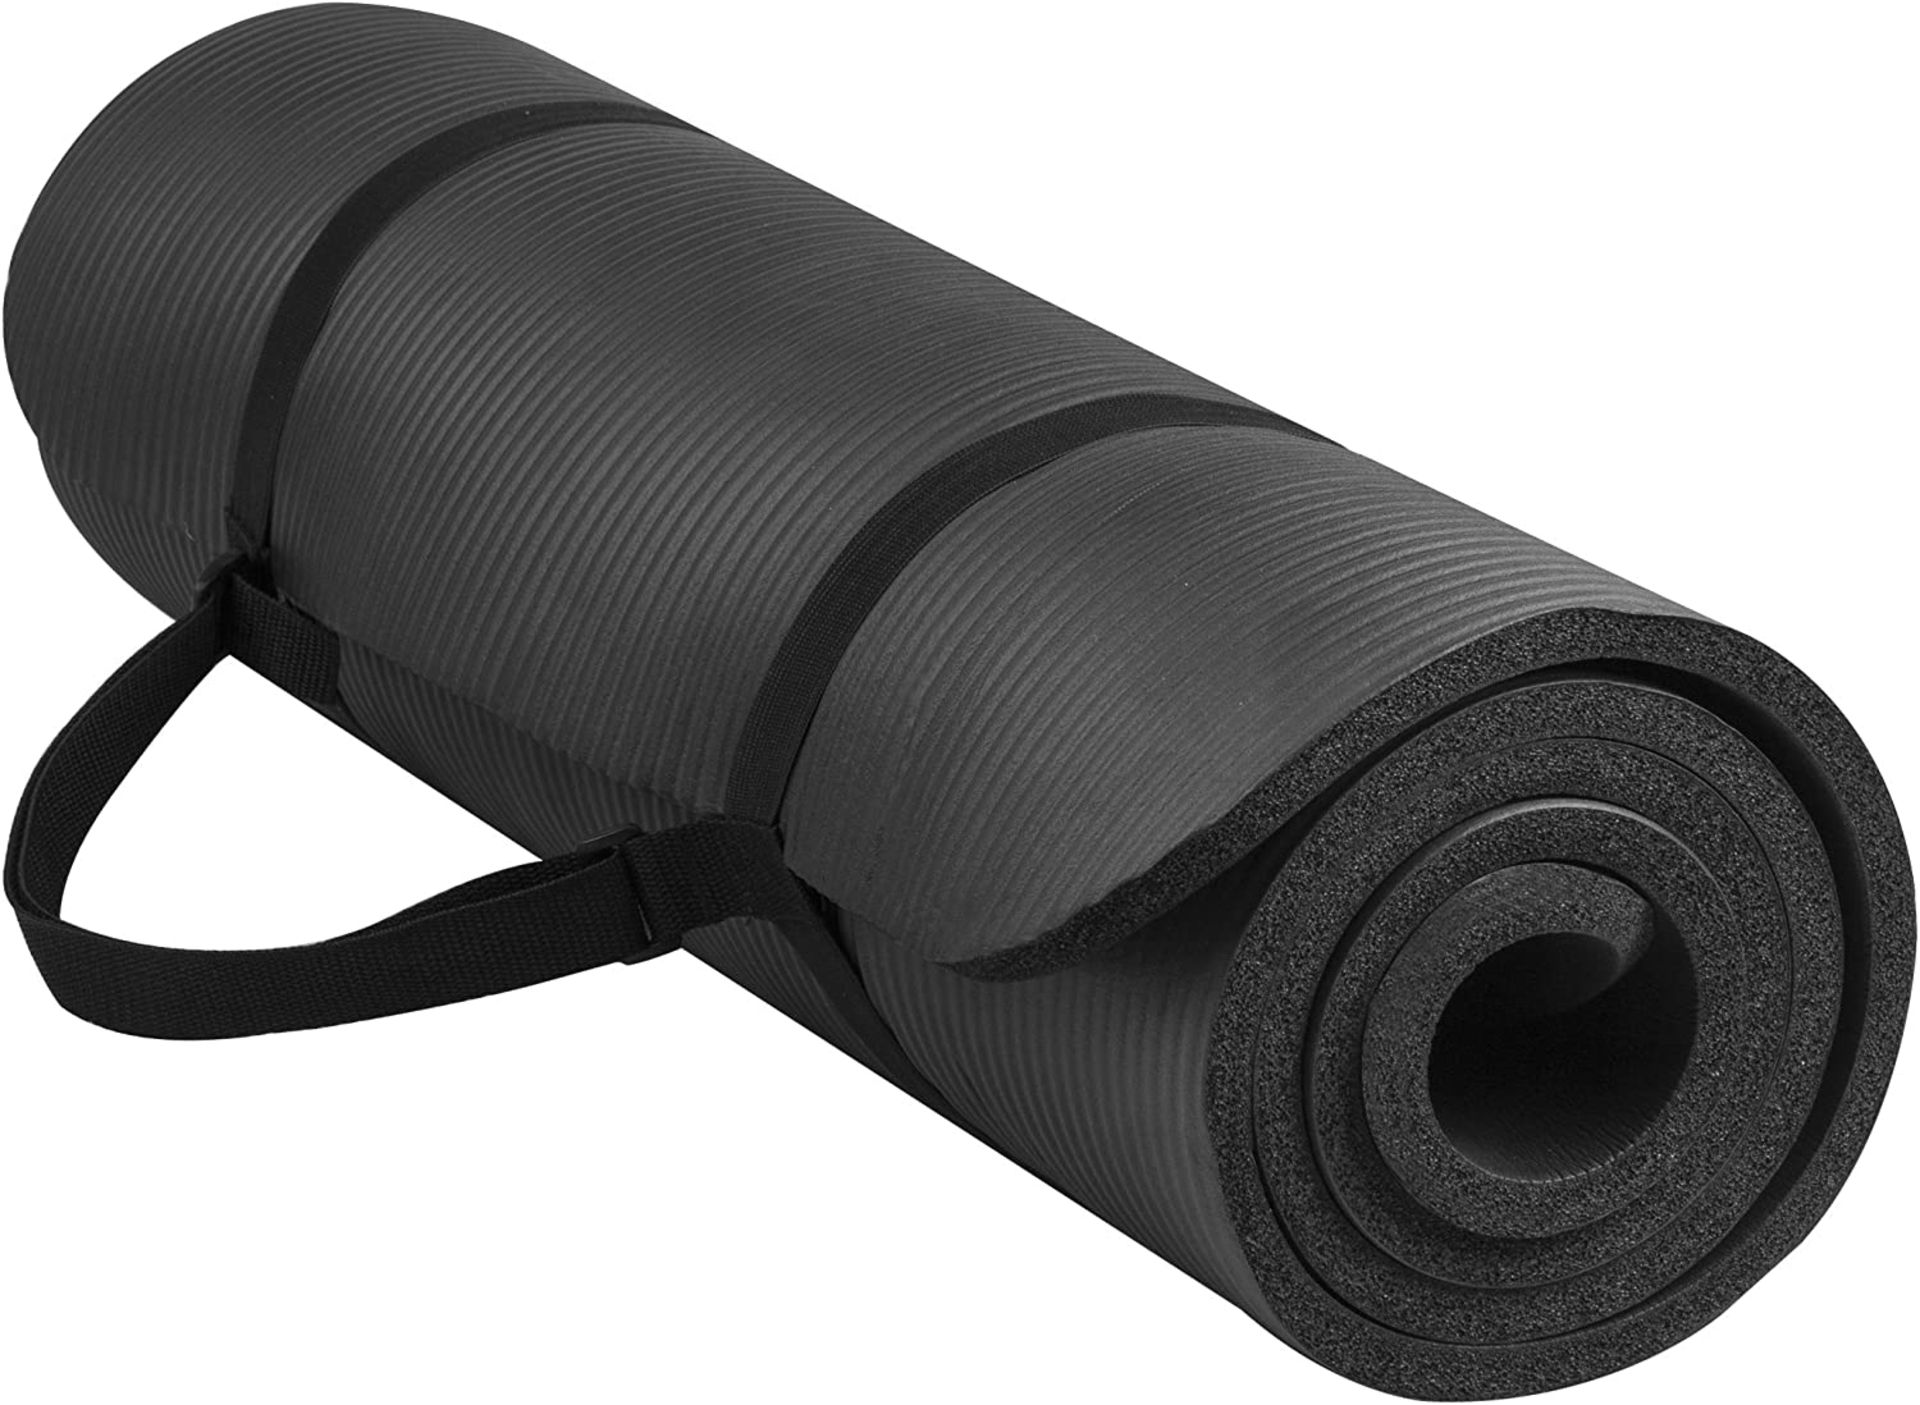 PALLET CONTAINING 36 X NEW LARGE BLACK YOGA MAT WITH HOLDING STRAP RRP £950